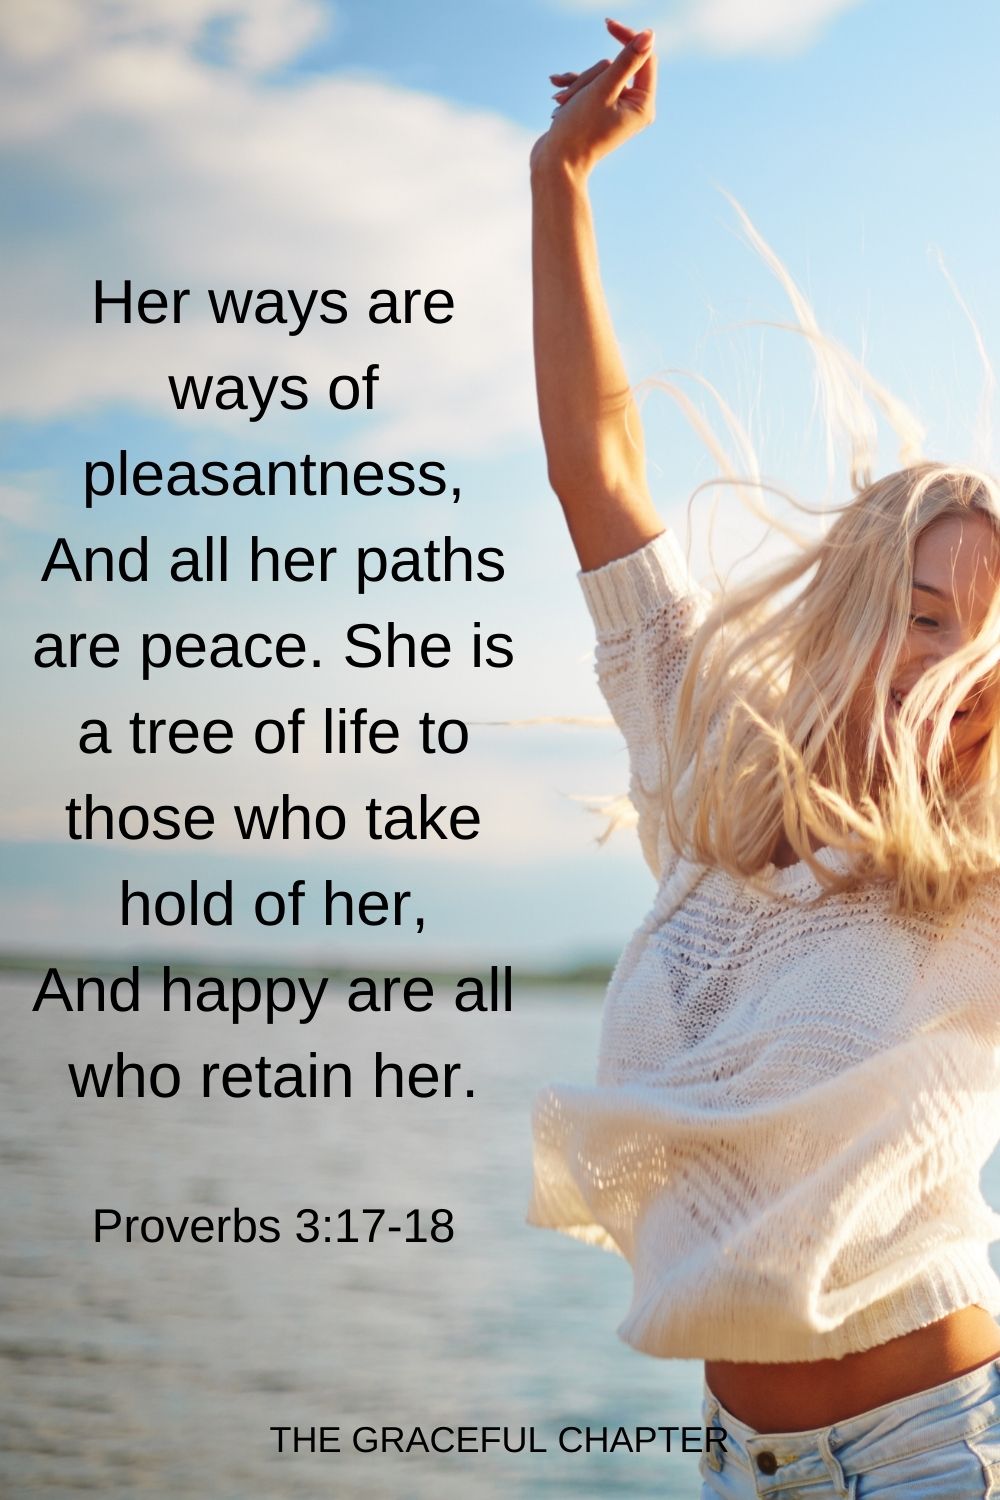 Her ways are ways of pleasantness, And all her paths are peace. She is a tree of life to those who take hold of her, And happy are all who retain her. Proverbs 3:17-18